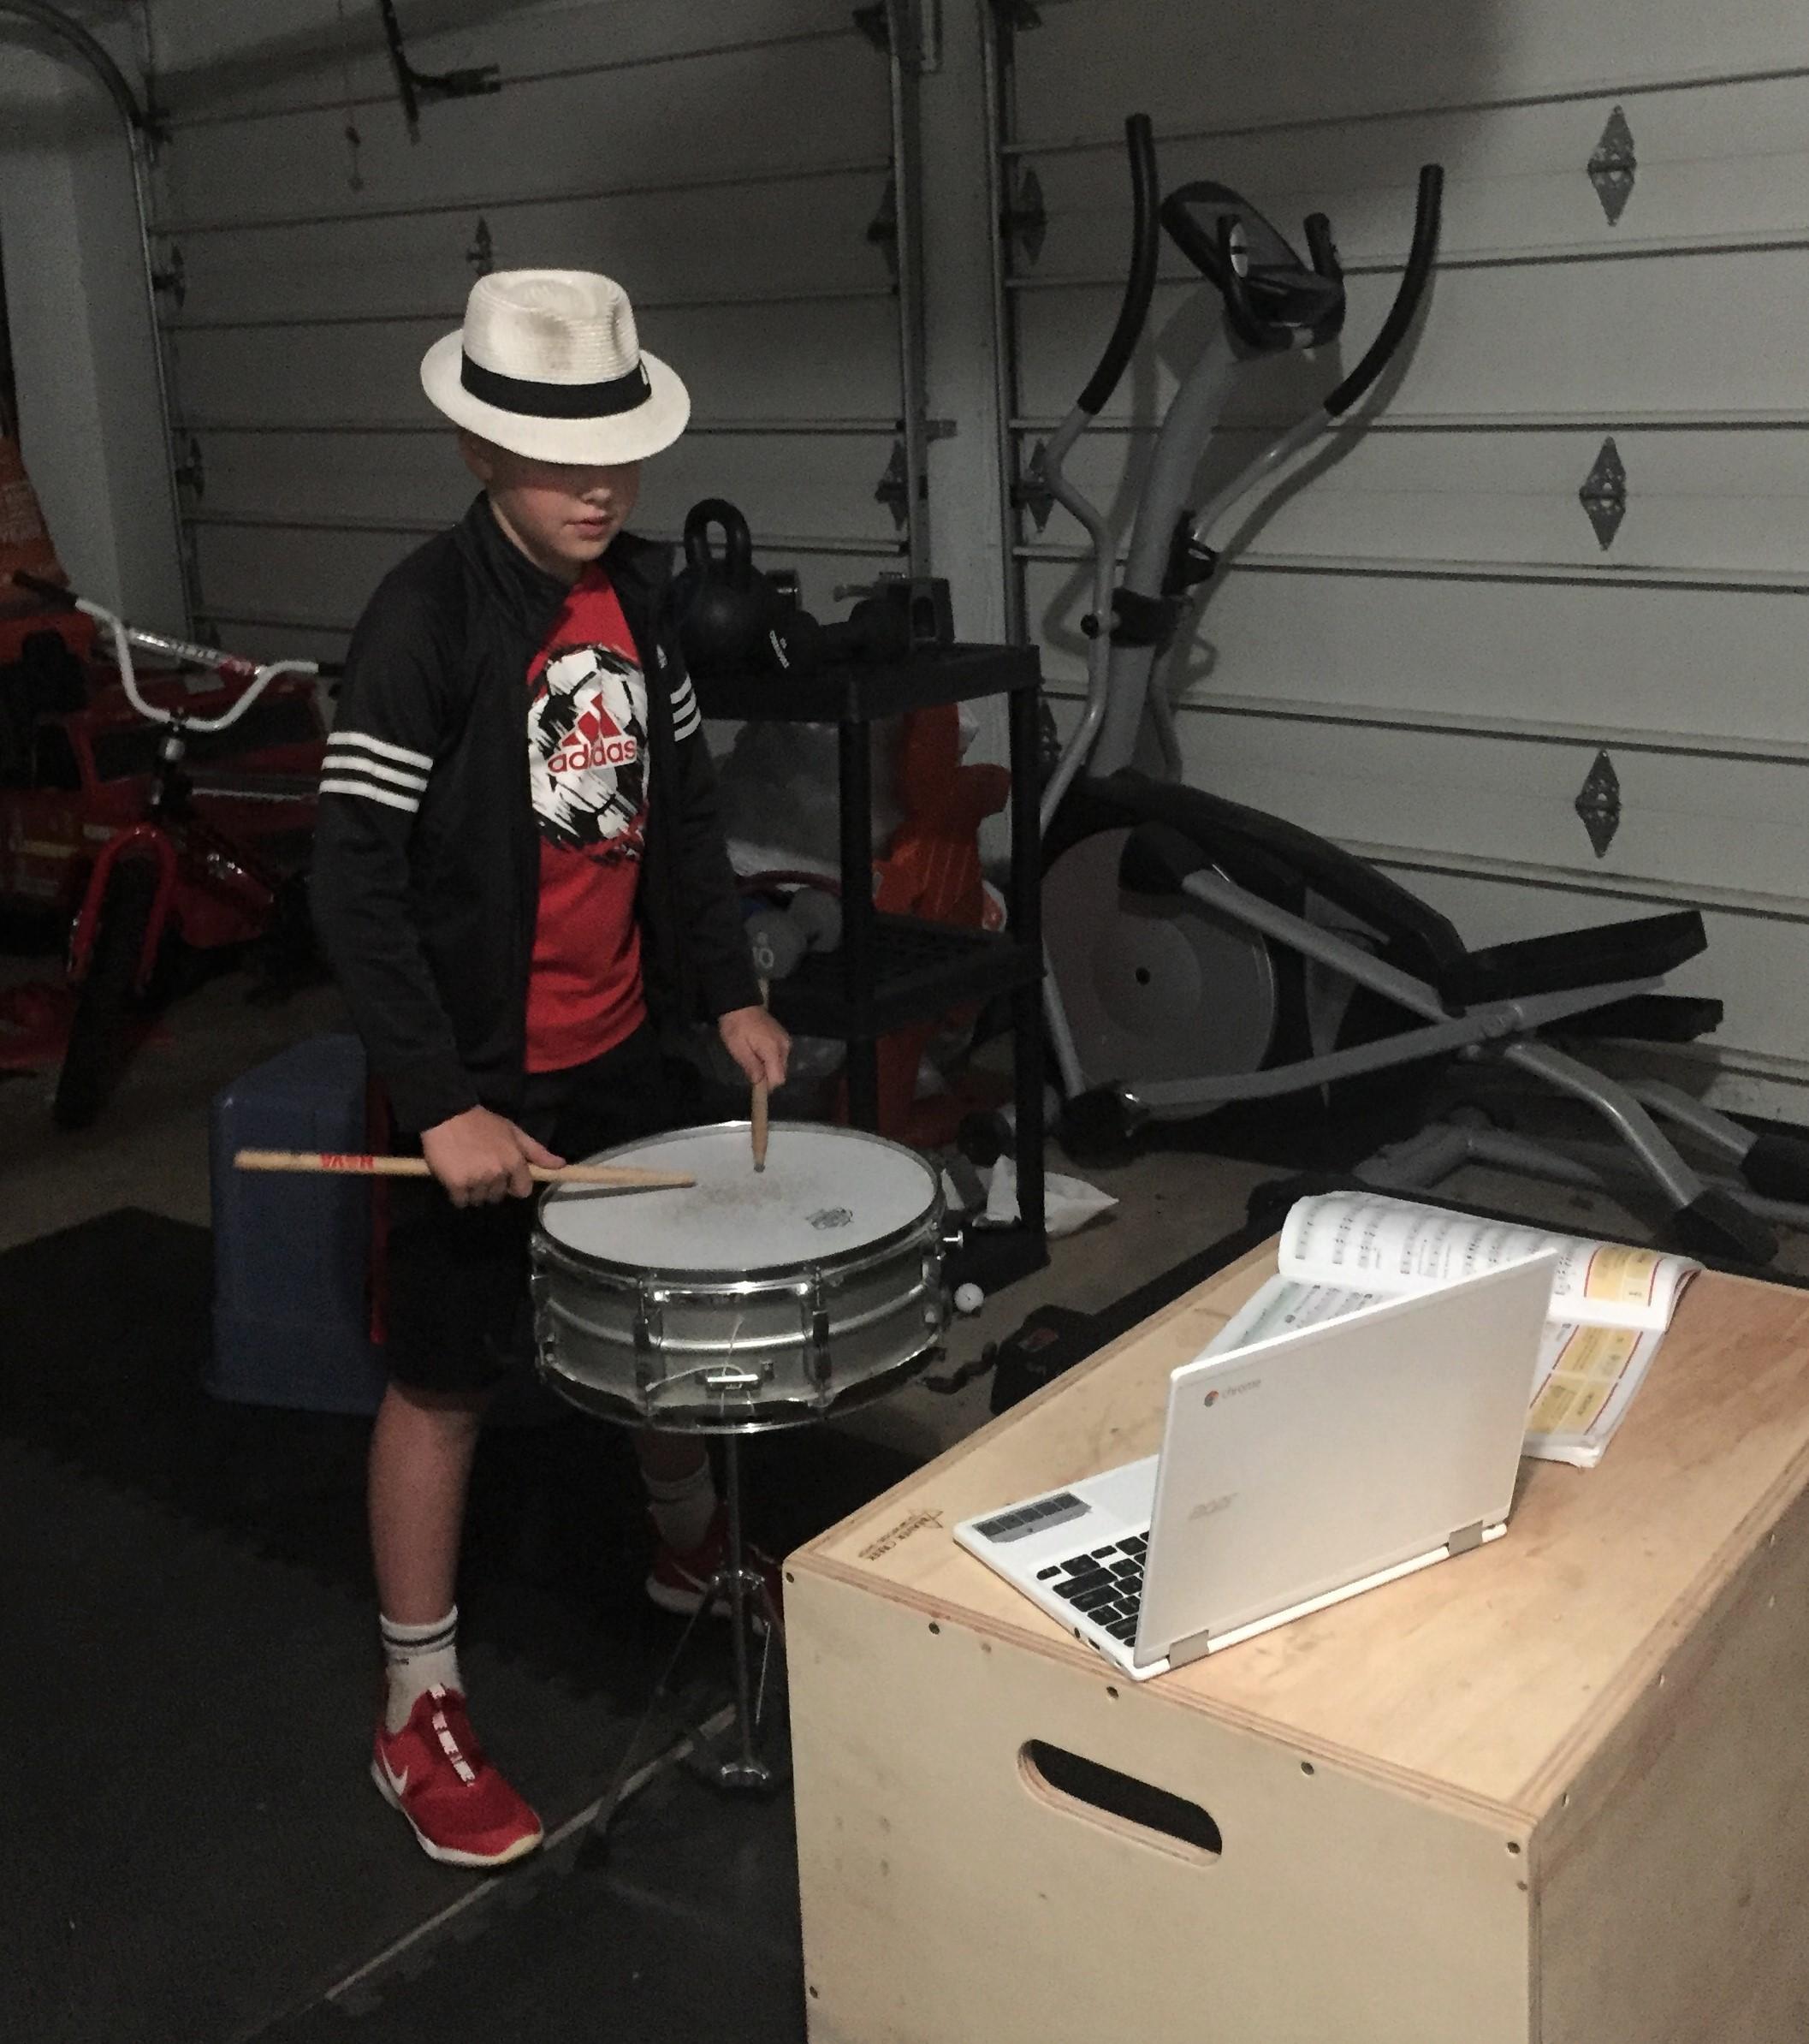 Student practicing the snare drum